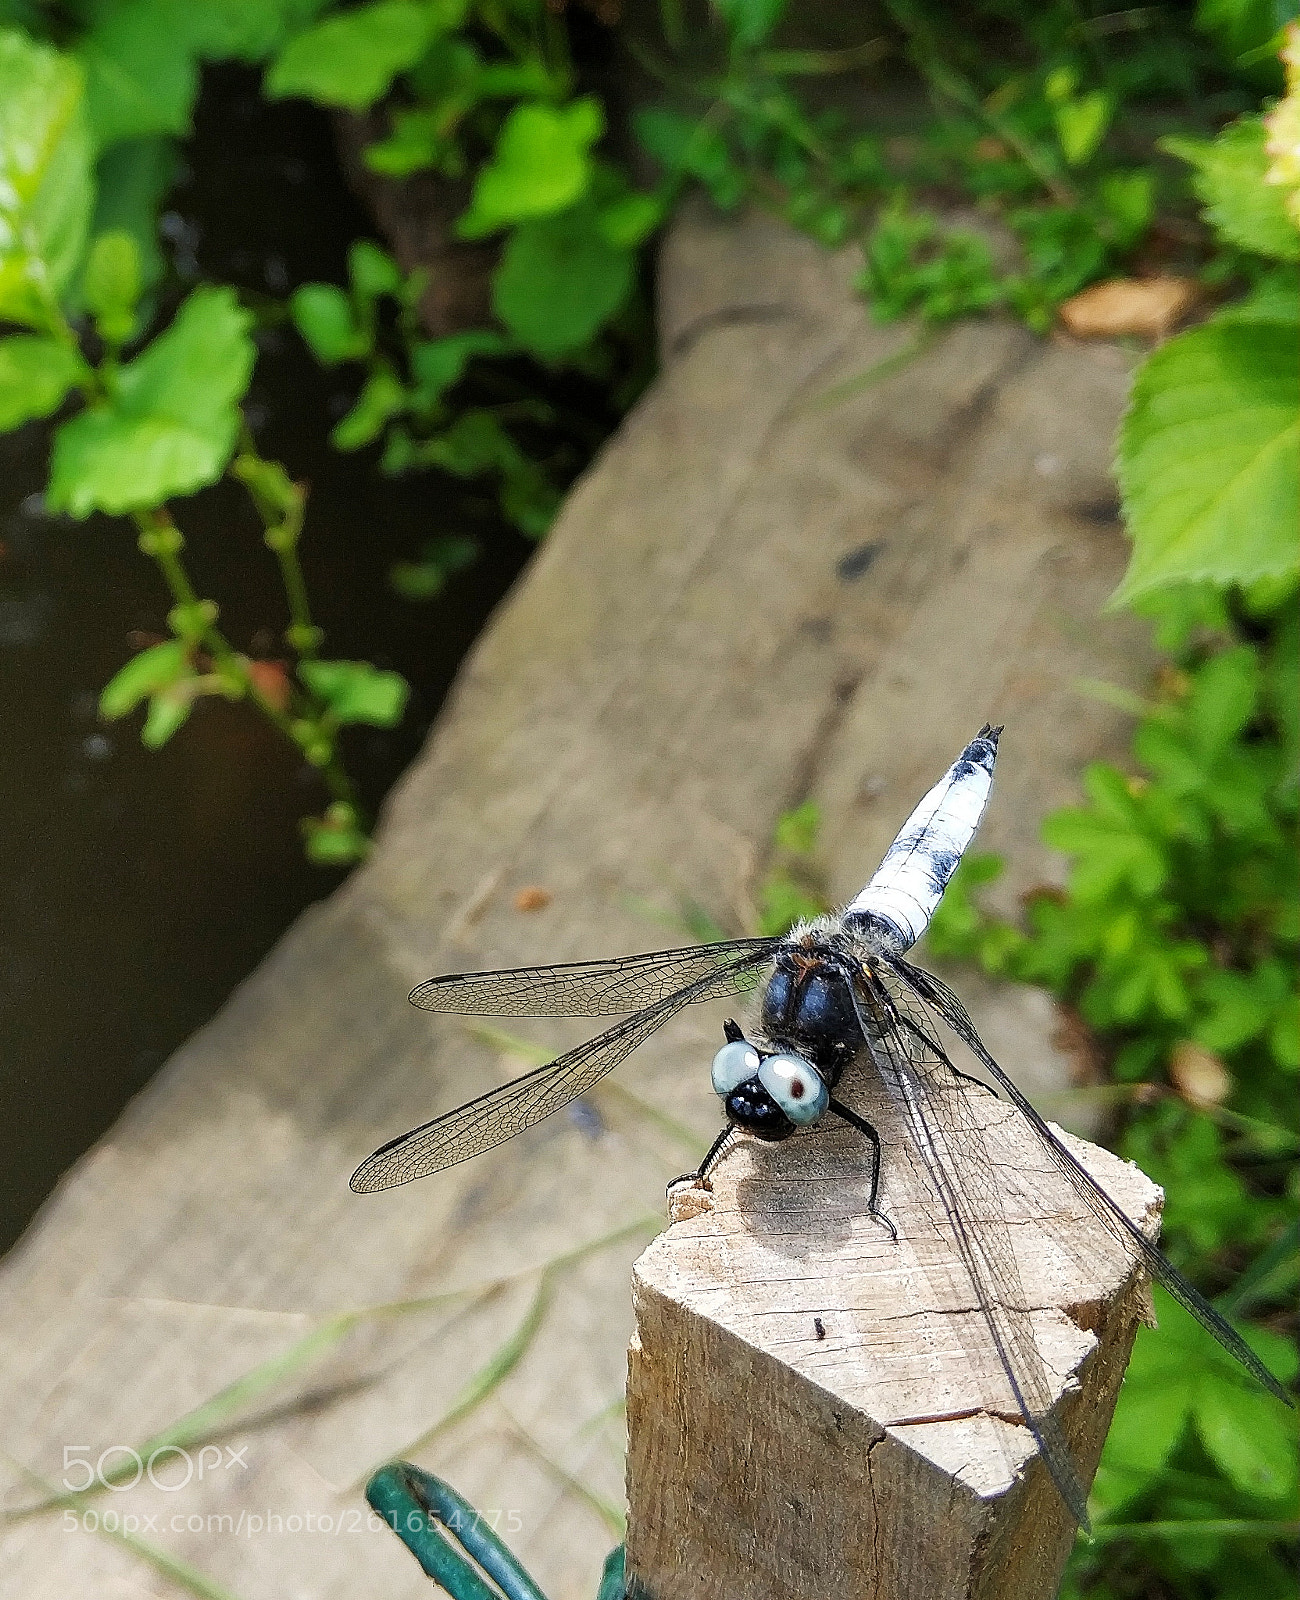 Xiaomi Mi Note 3 sample photo. Dragonfly photography